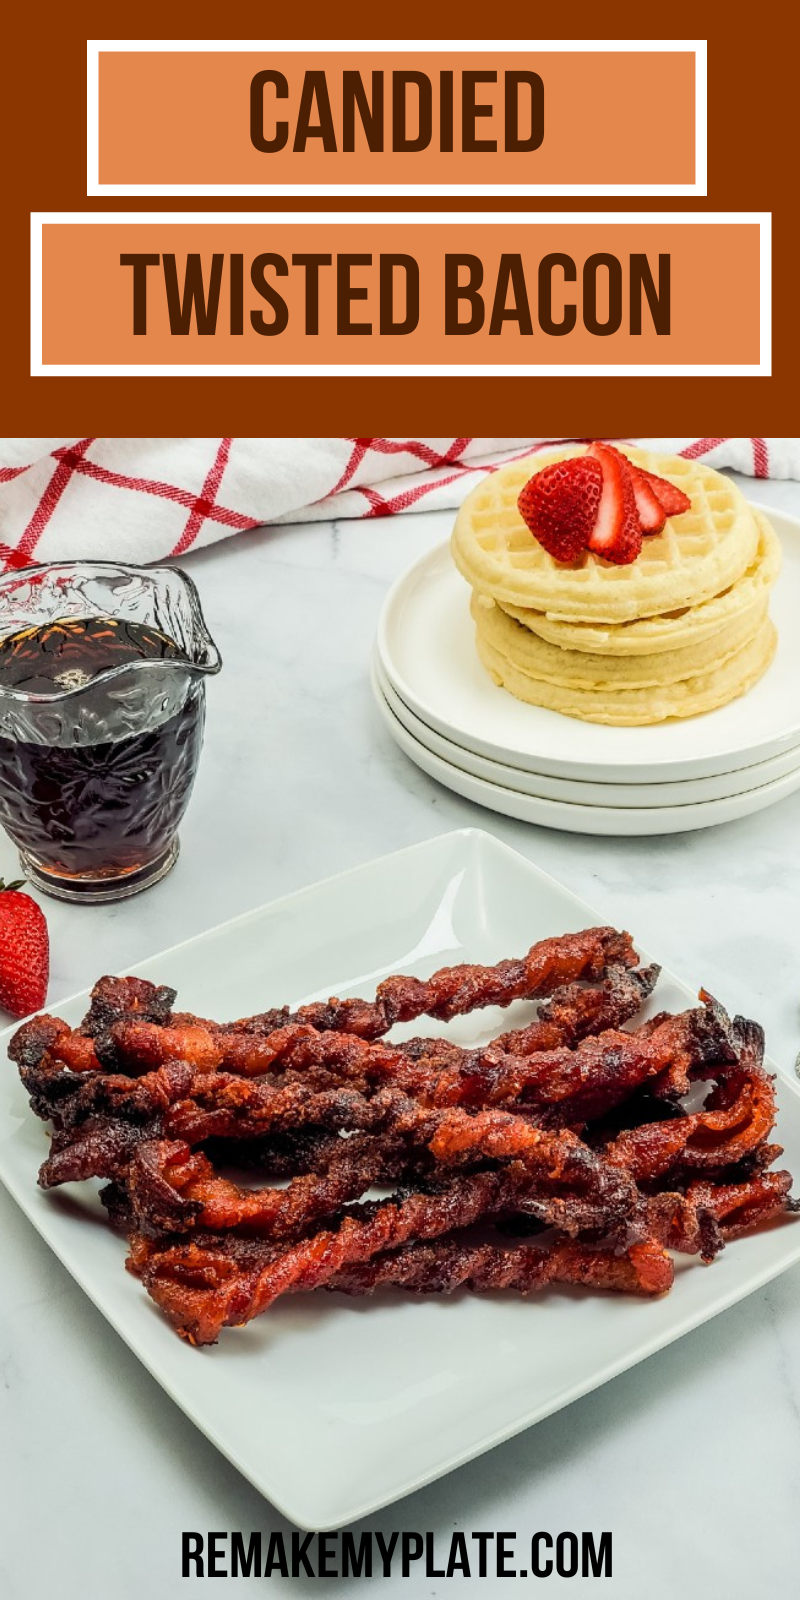 Candied Twisted Bacon